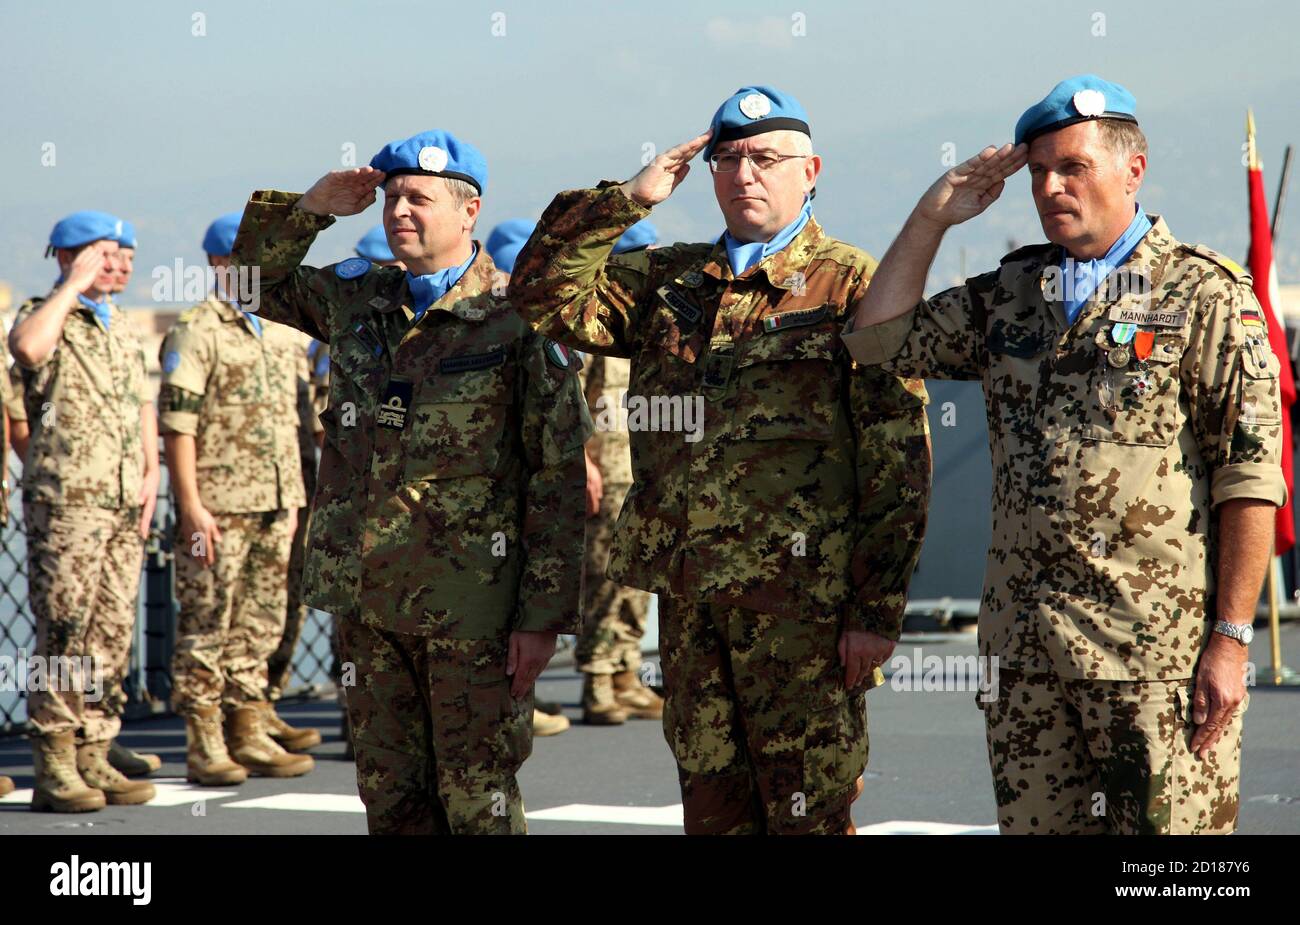 United Nations Interim Force in Lebanon (UNIFIL) Commander Claudio Graziano  (C), Germany?s Rear Admiral Juergen Mannhardt (R) and Rear Admiral Paolo  Sandalli of Italy (L) salute during a handover ceremony aboard German